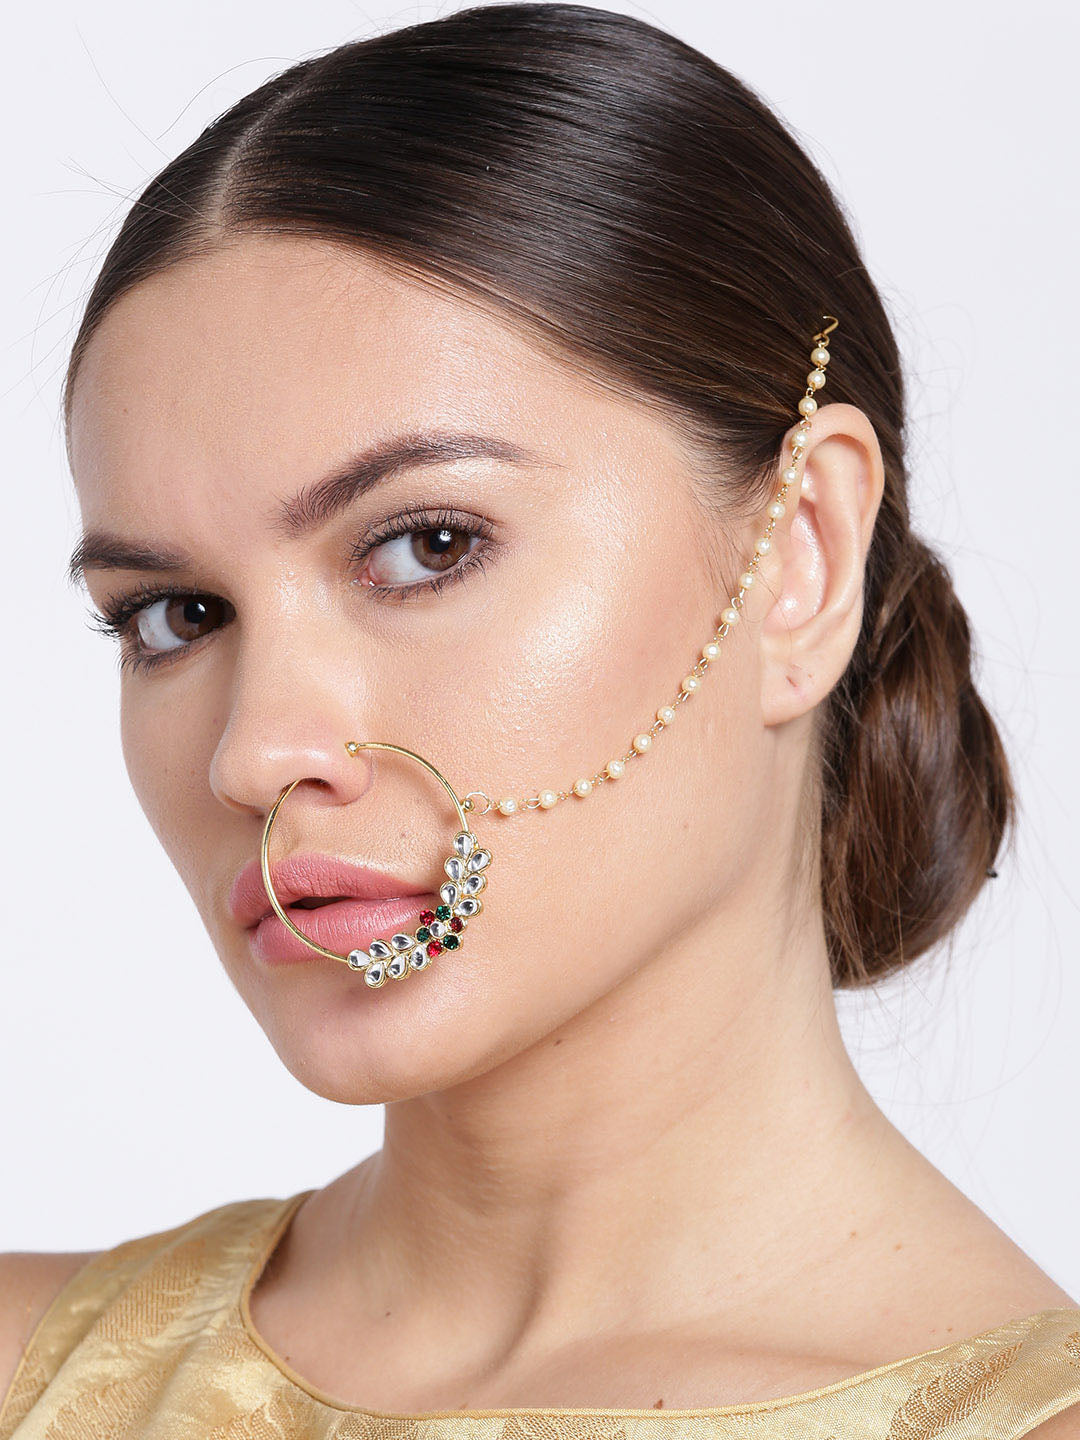 traditional Gold Plated Nose Ring/Nath with 3 Pearl Chain For Women/Girls